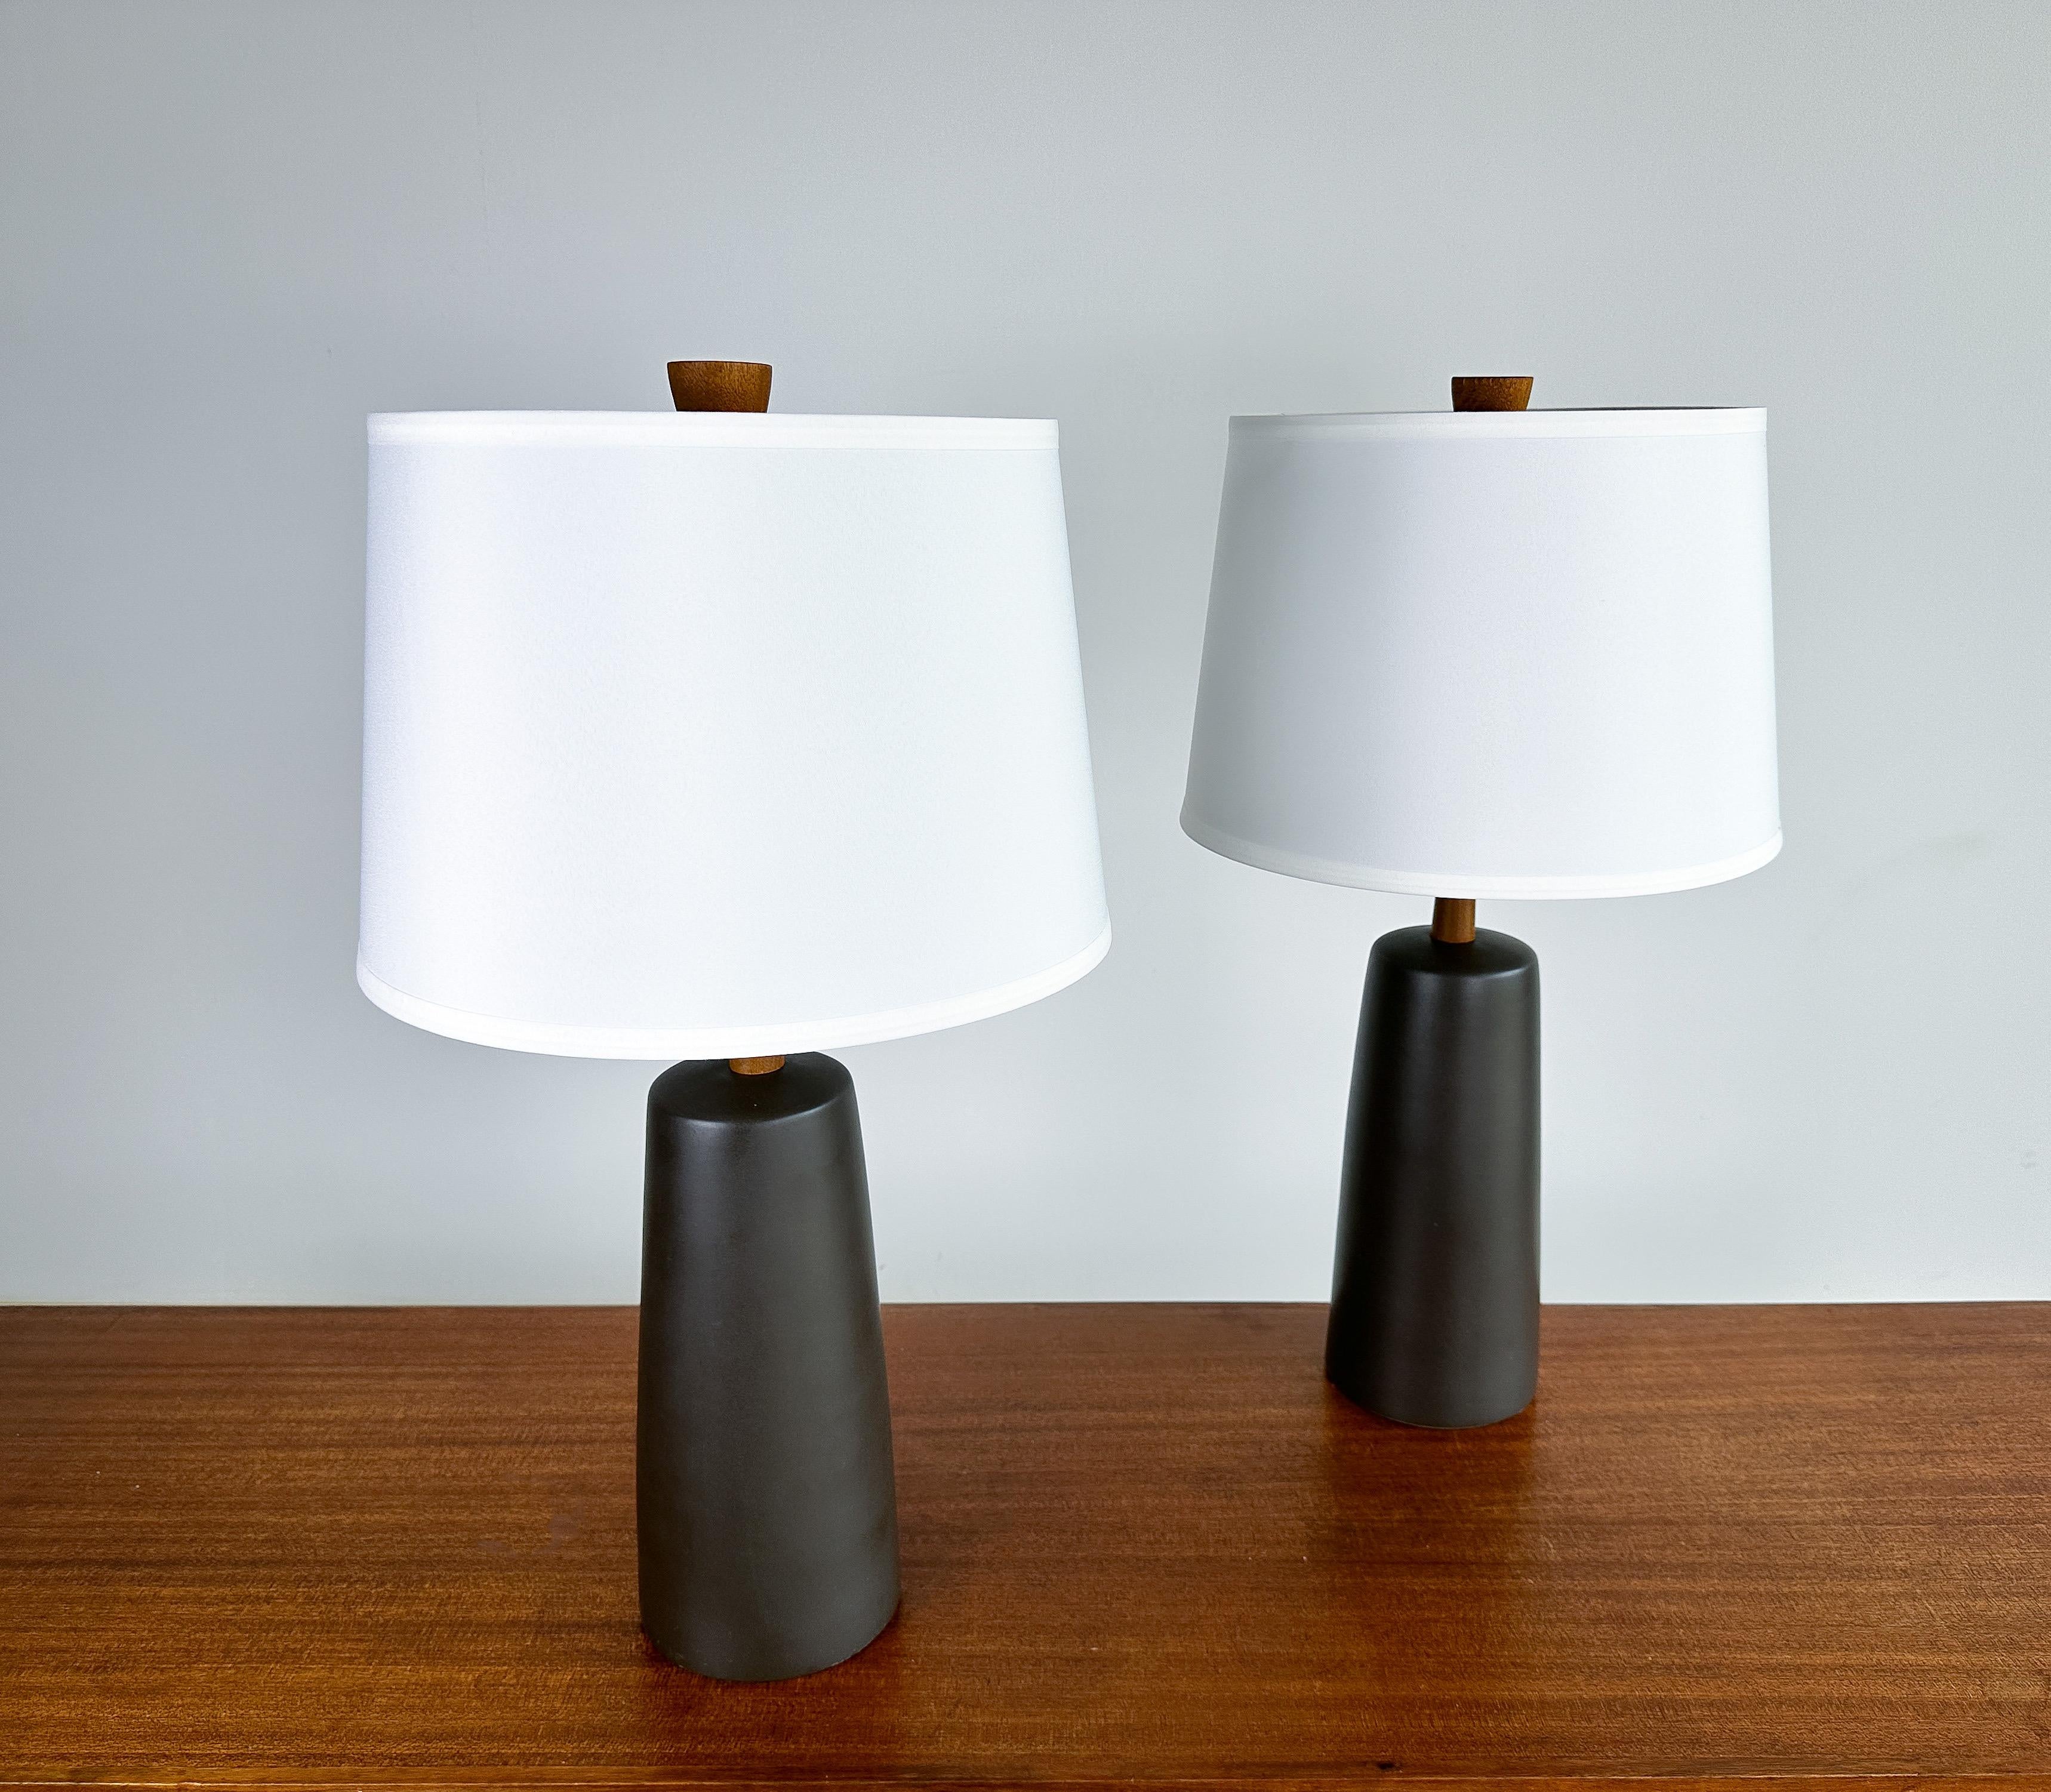 Mid-20th Century Martz Glazed Ceramic Table Lamps, Marshall Studios, 1960s, a Pair For Sale